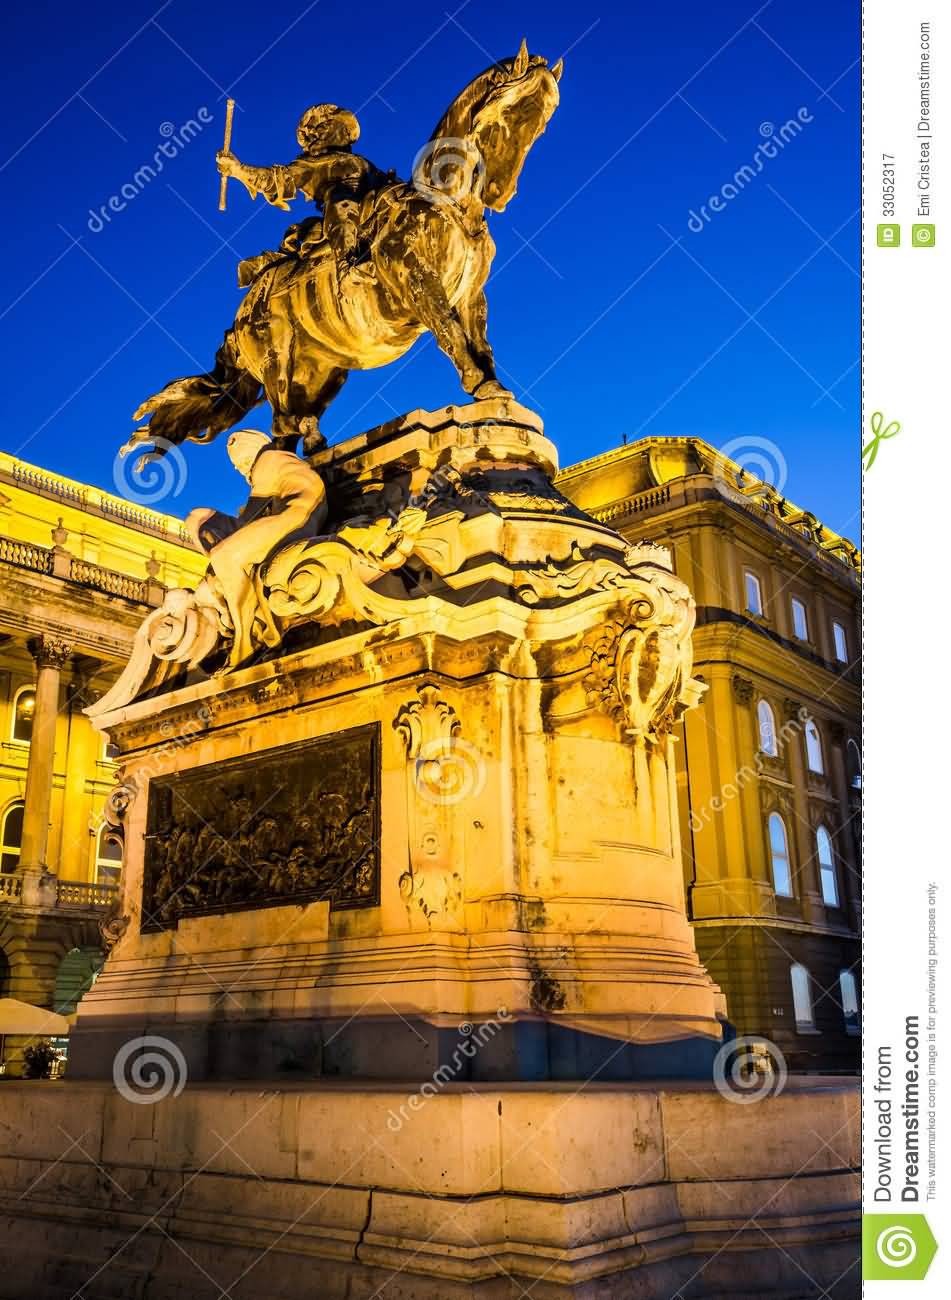 Statue Of Eugene Of Savoy At Buda Castle Lit Up At Night